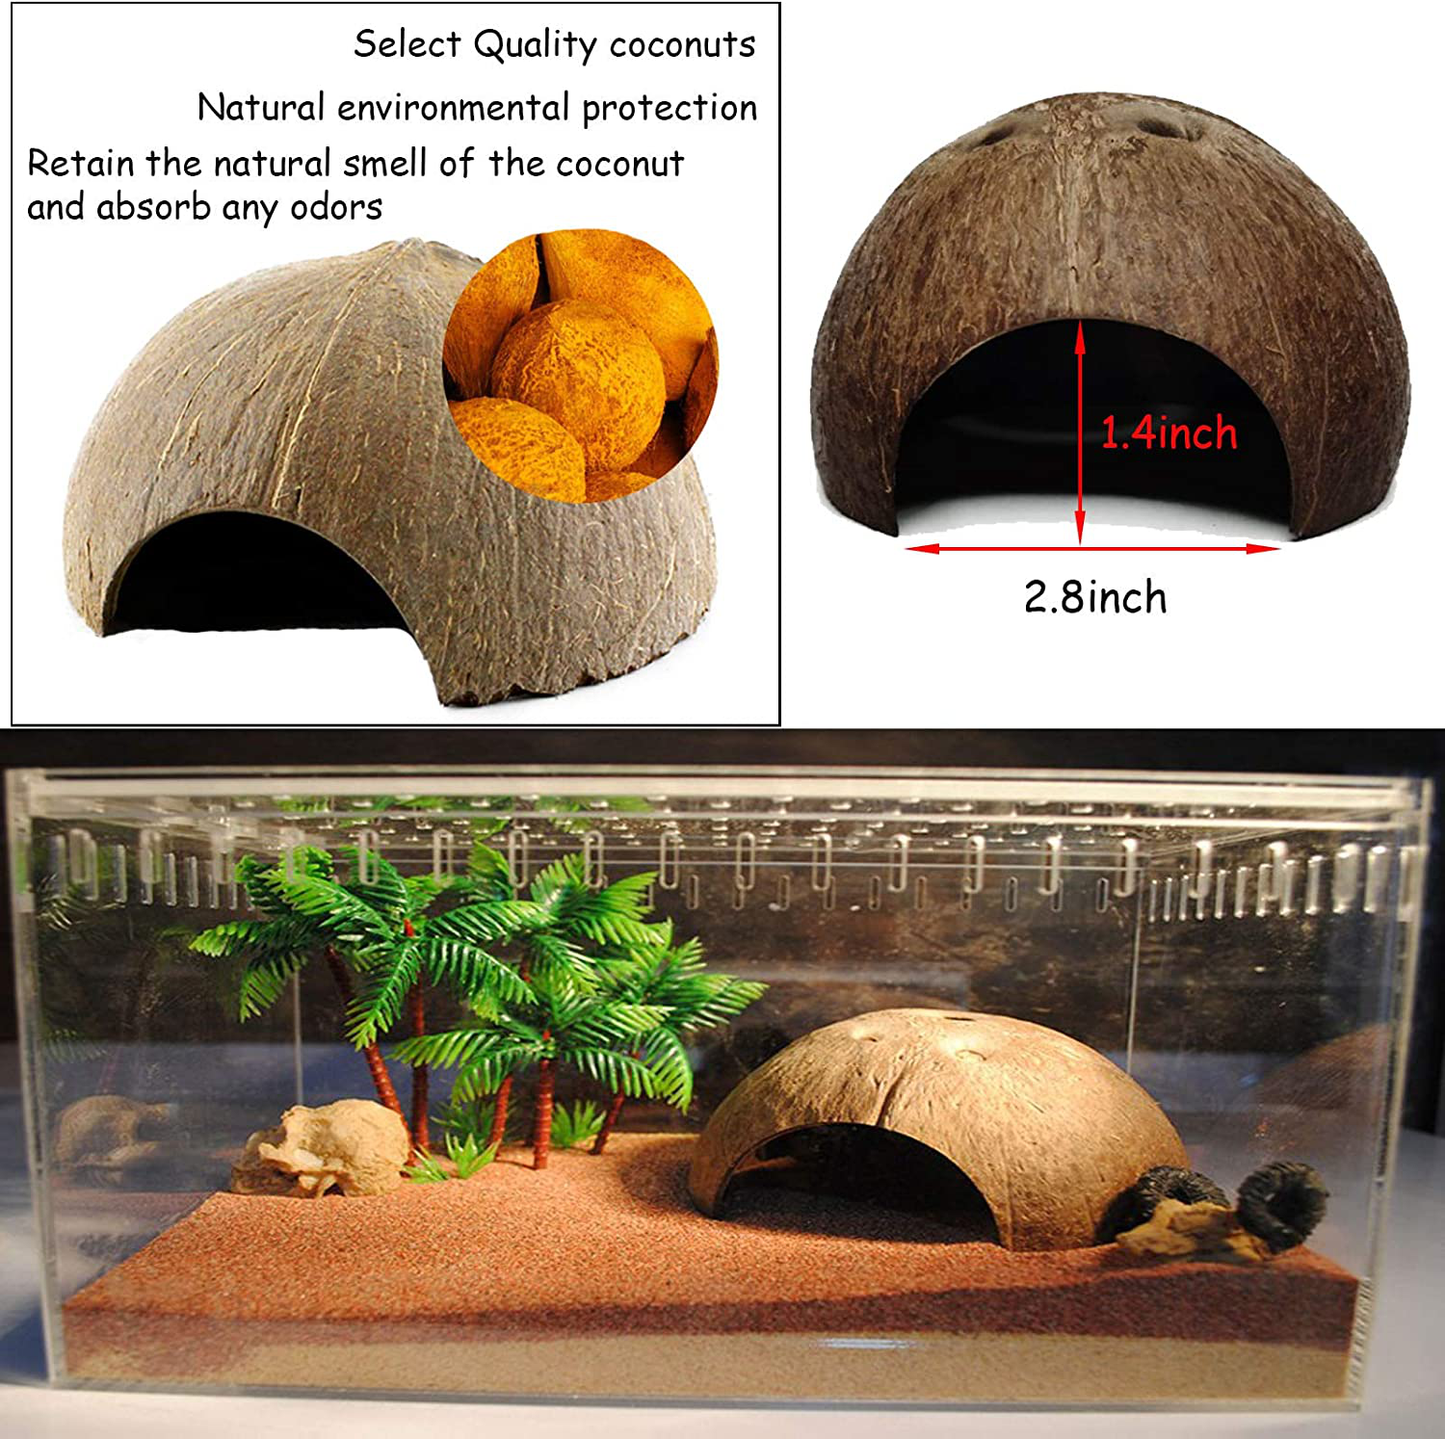 Kathson Leopard Gecko Tank Accessories Reptile Habitat Decor Reptiles Hanging Plants Artificial Bendable Climbing Vines and Hidden Coconut Shell Hole for Chameleon, Lizards, Gecko, Snakes Animals & Pet Supplies > Pet Supplies > Small Animal Supplies > Small Animal Habitat Accessories kathson   